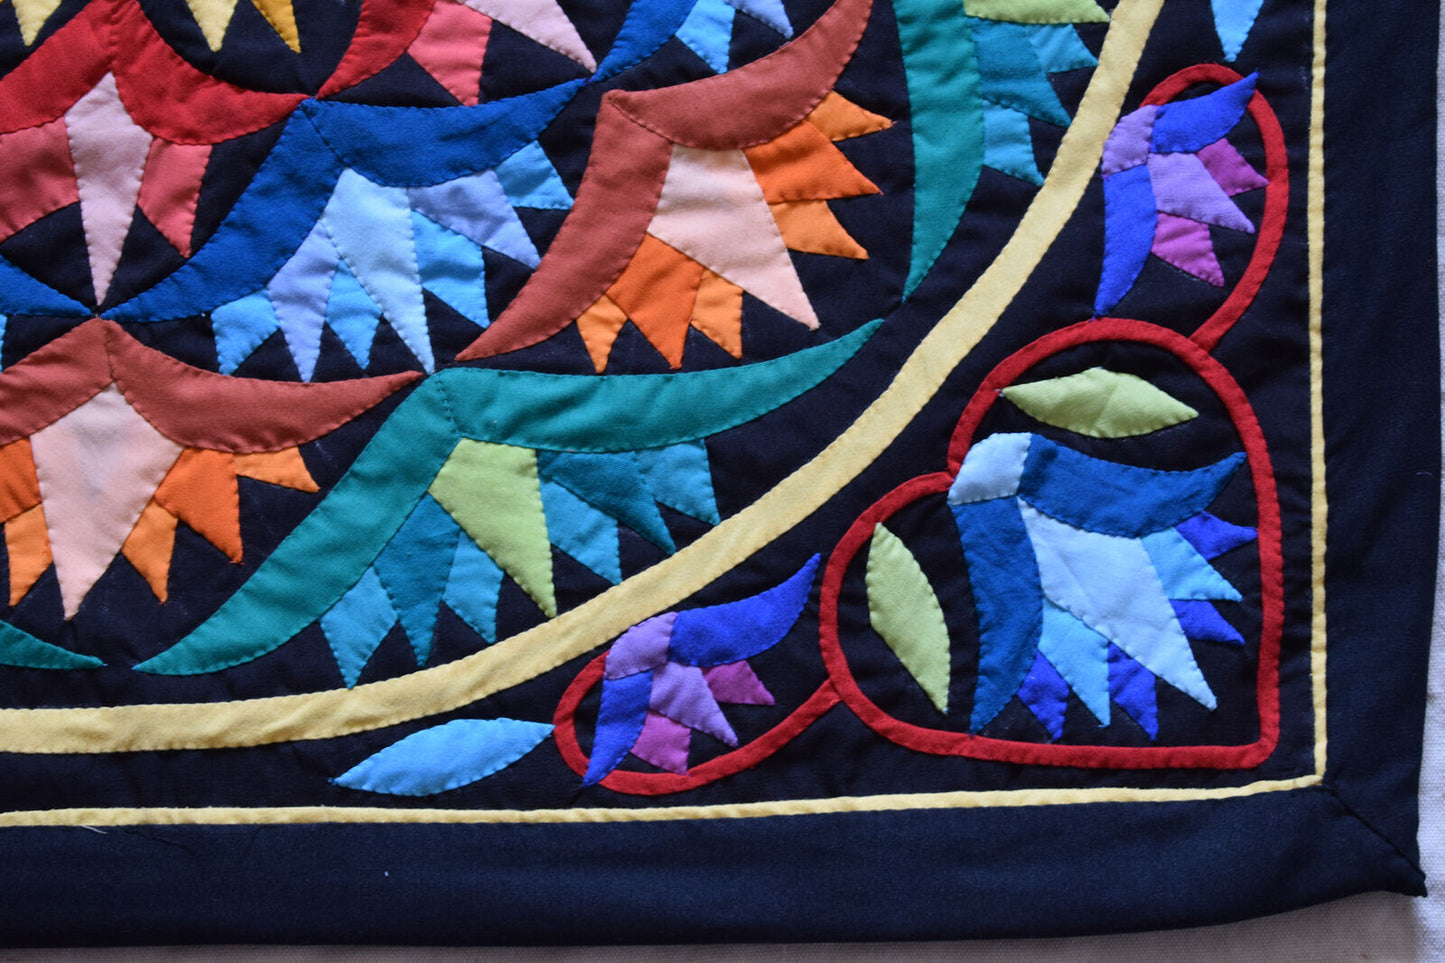 Hand stitched Egyptian colorful applique quilt patchwork/wall hanging Tapestry